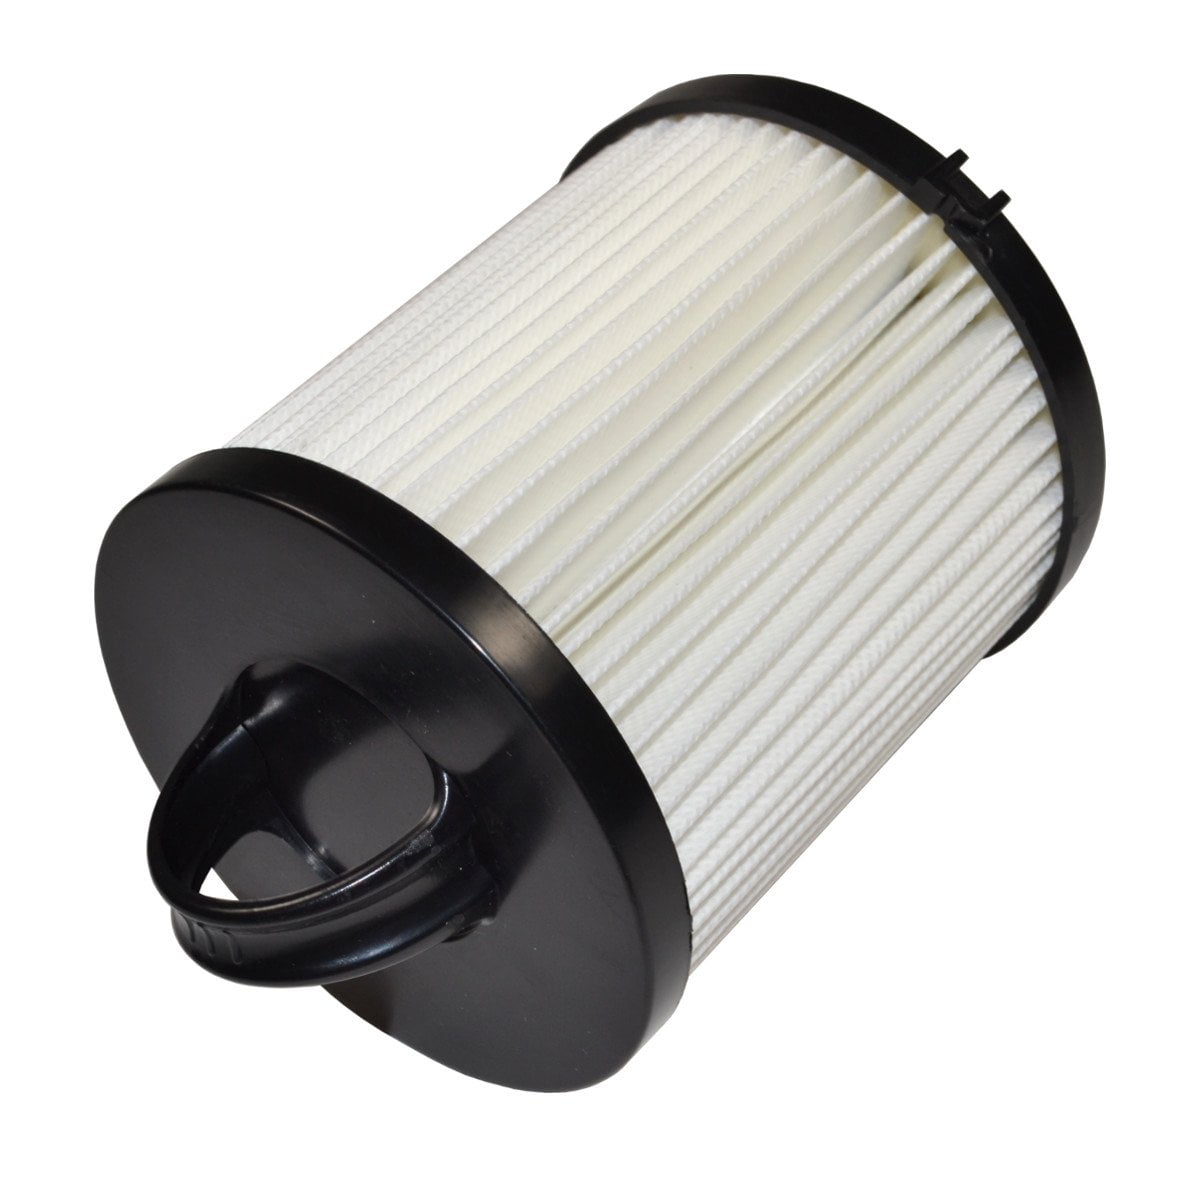 2x HQRP HEPA Filters for Eureka AirSpeed AS1000A AS1001A AS1001AX Pet AS1002A 